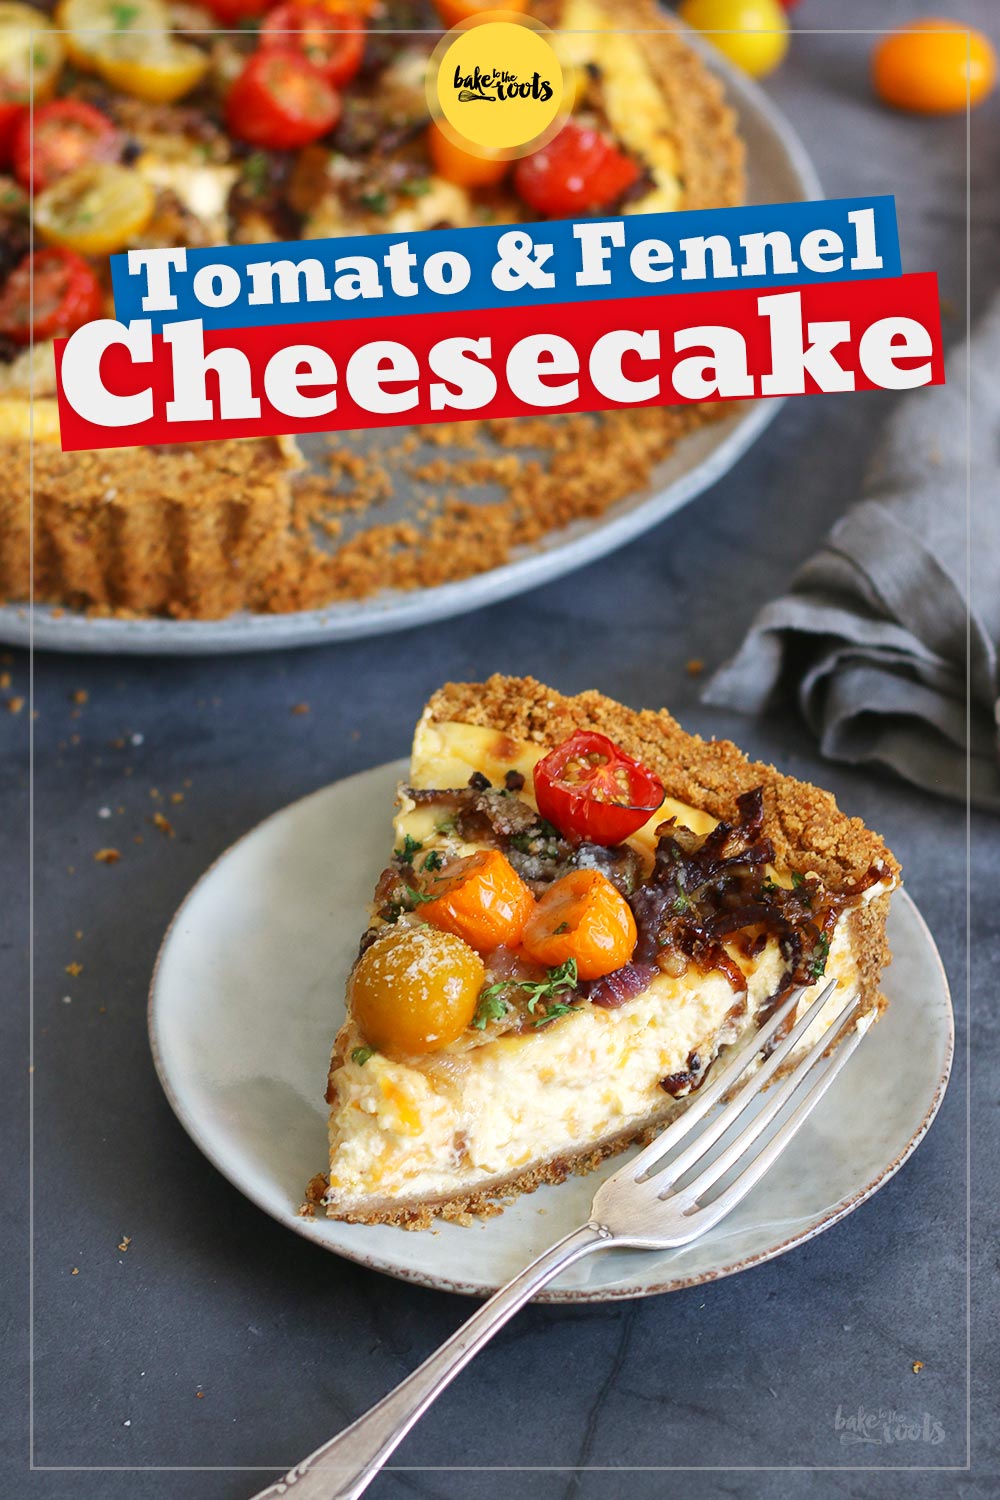 Tomato Fennel Cheesecake | Bake to the roots